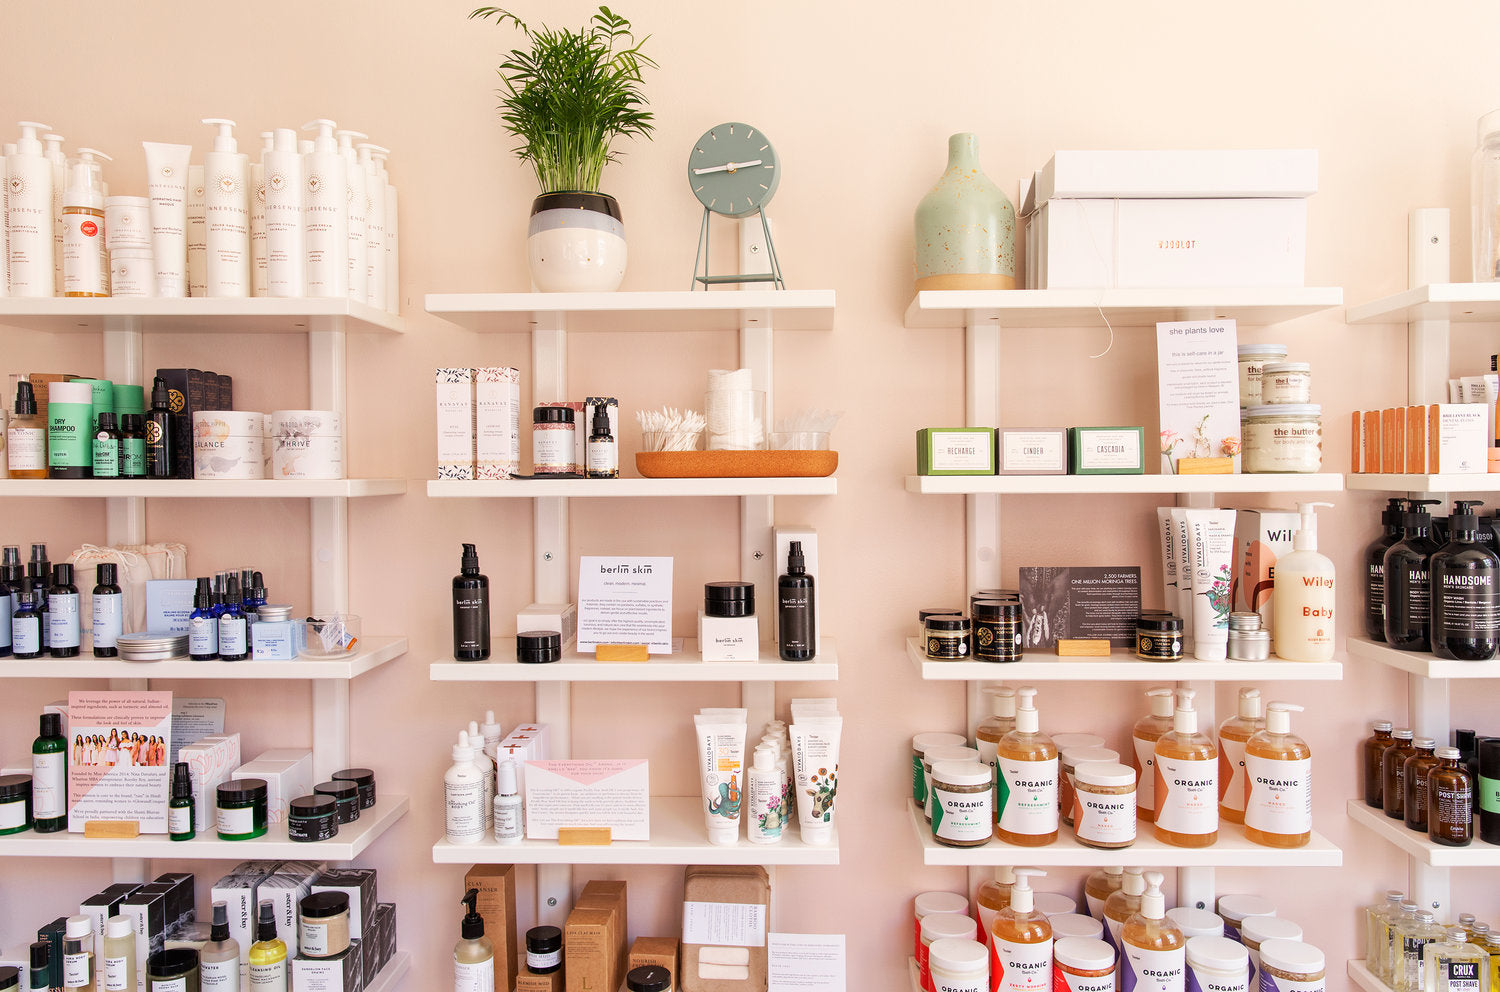 Looking for Clean, Effective Skincare? Here’s Your How-To Guide for Reading Product Labels